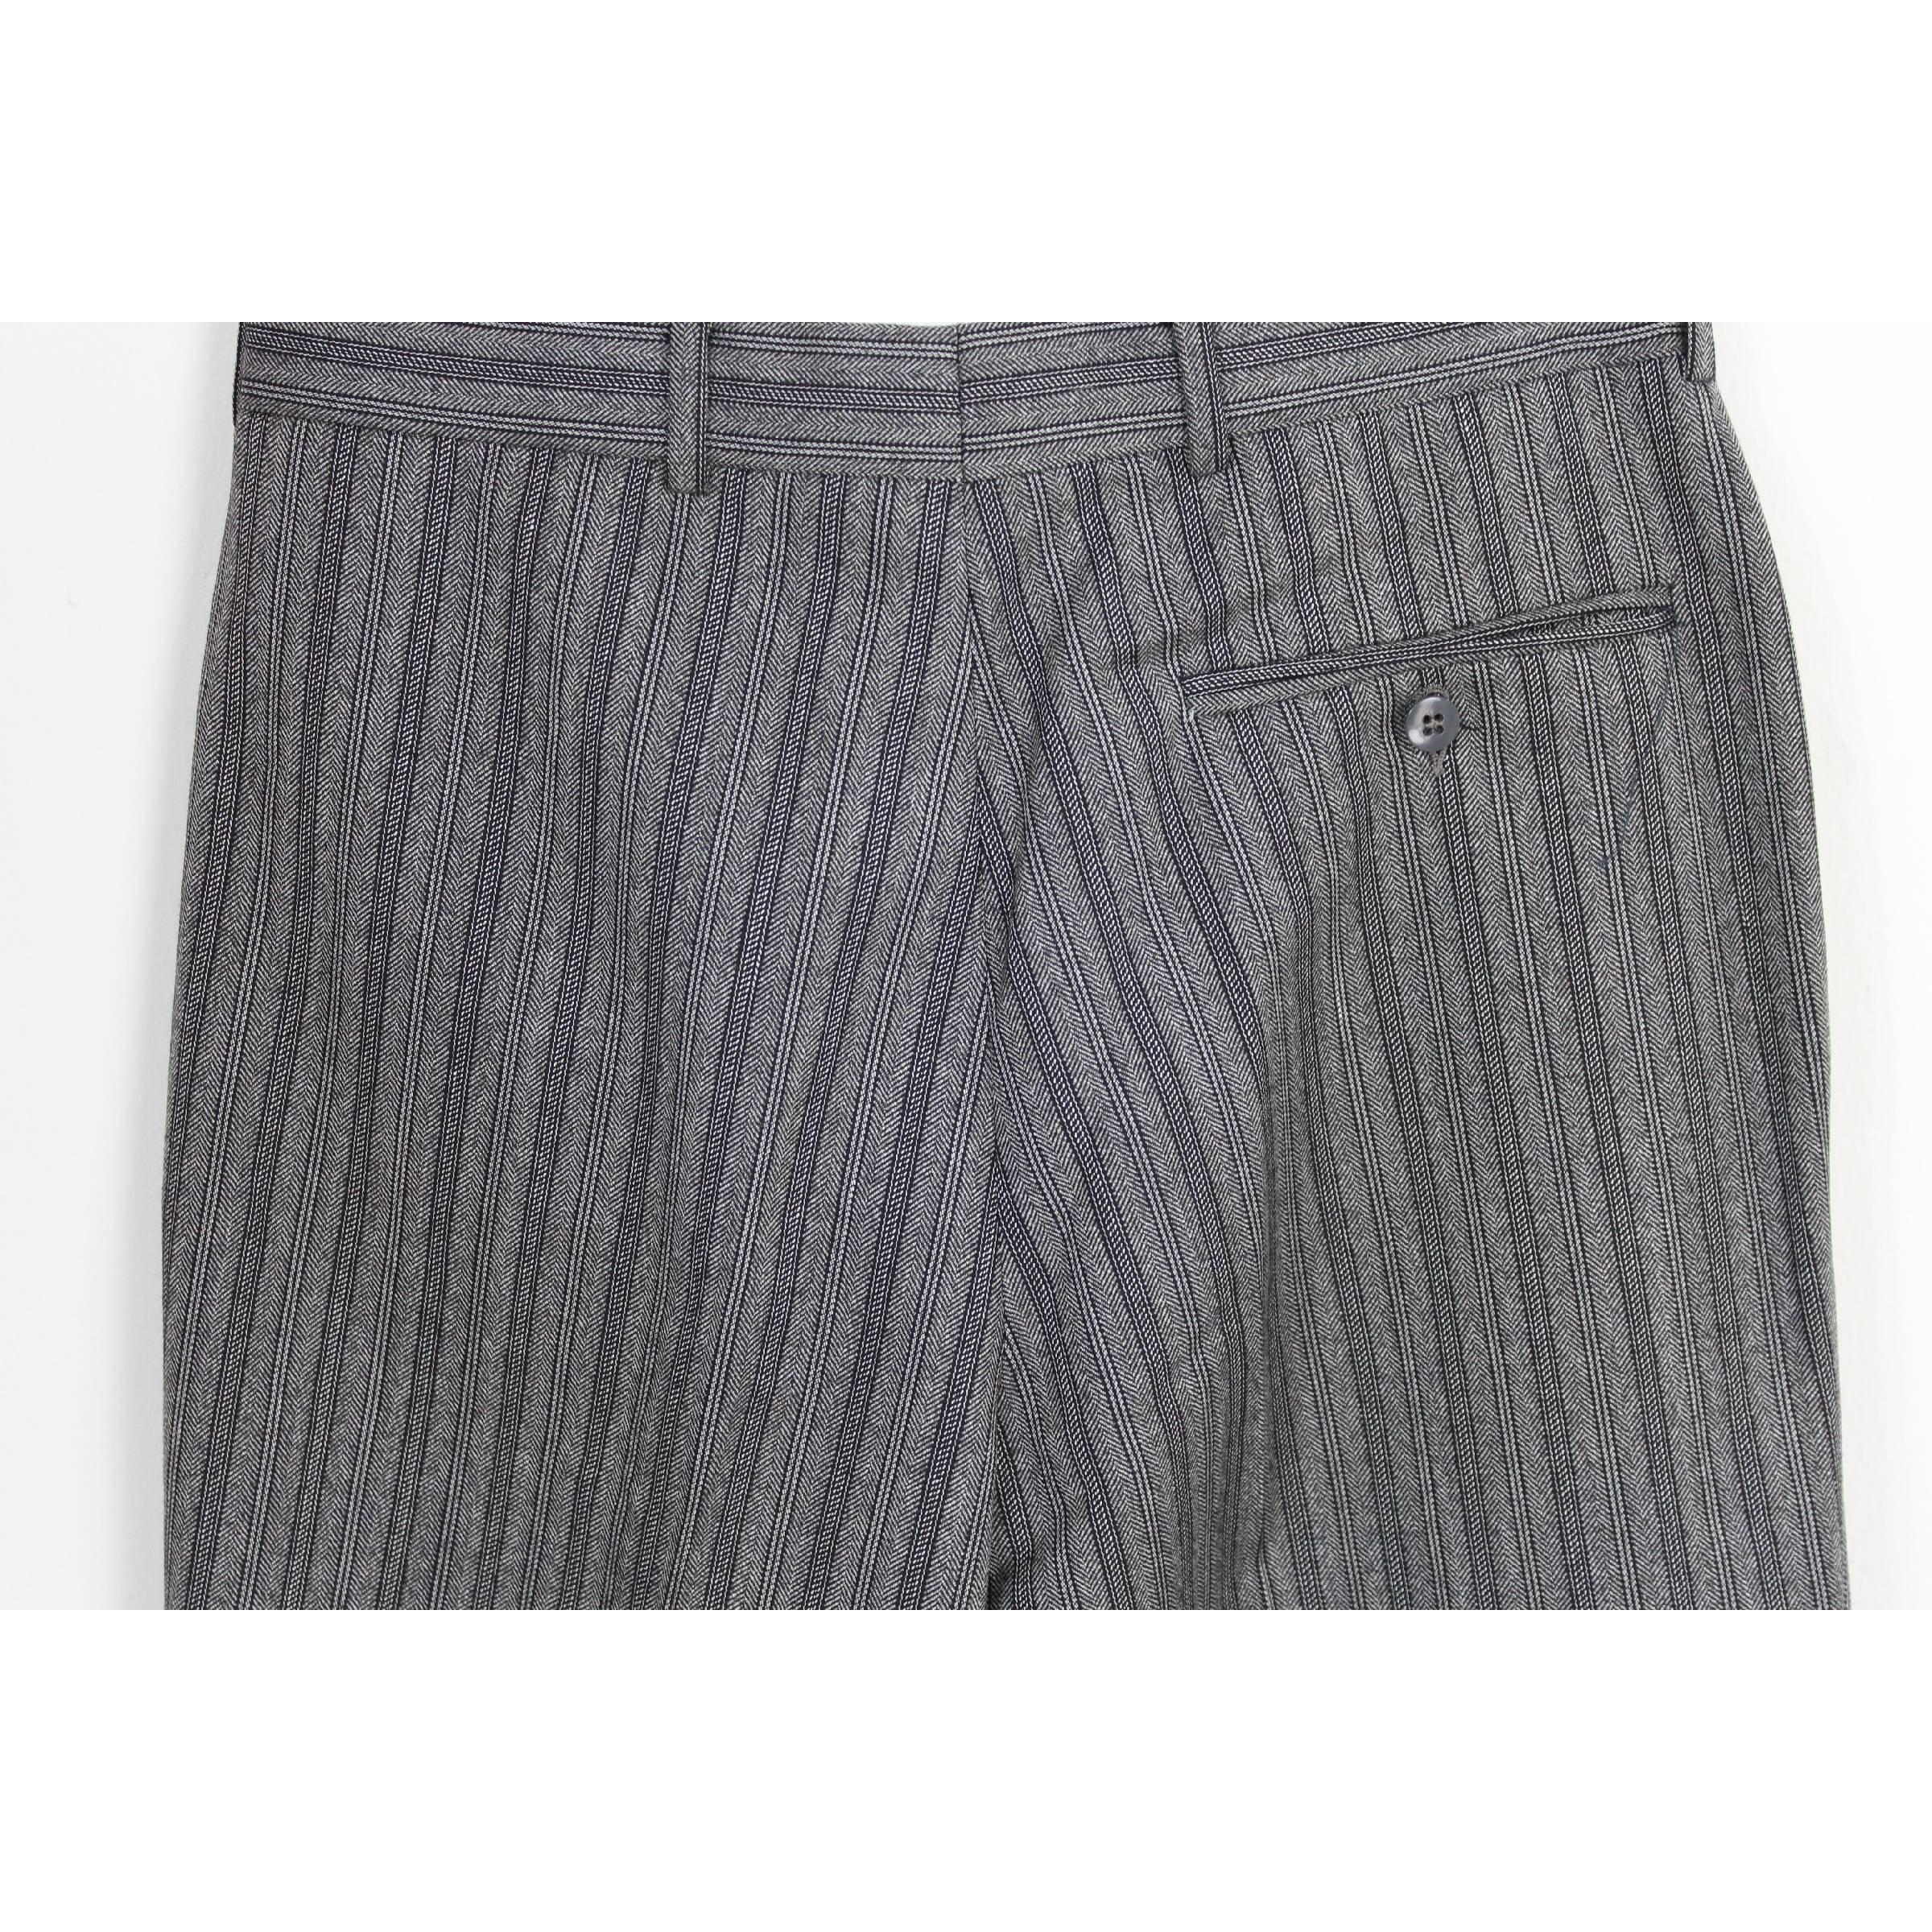 Pierre Cardin Suit Pants Gray and Black Wool France Smoking, 1990s  For Sale 3